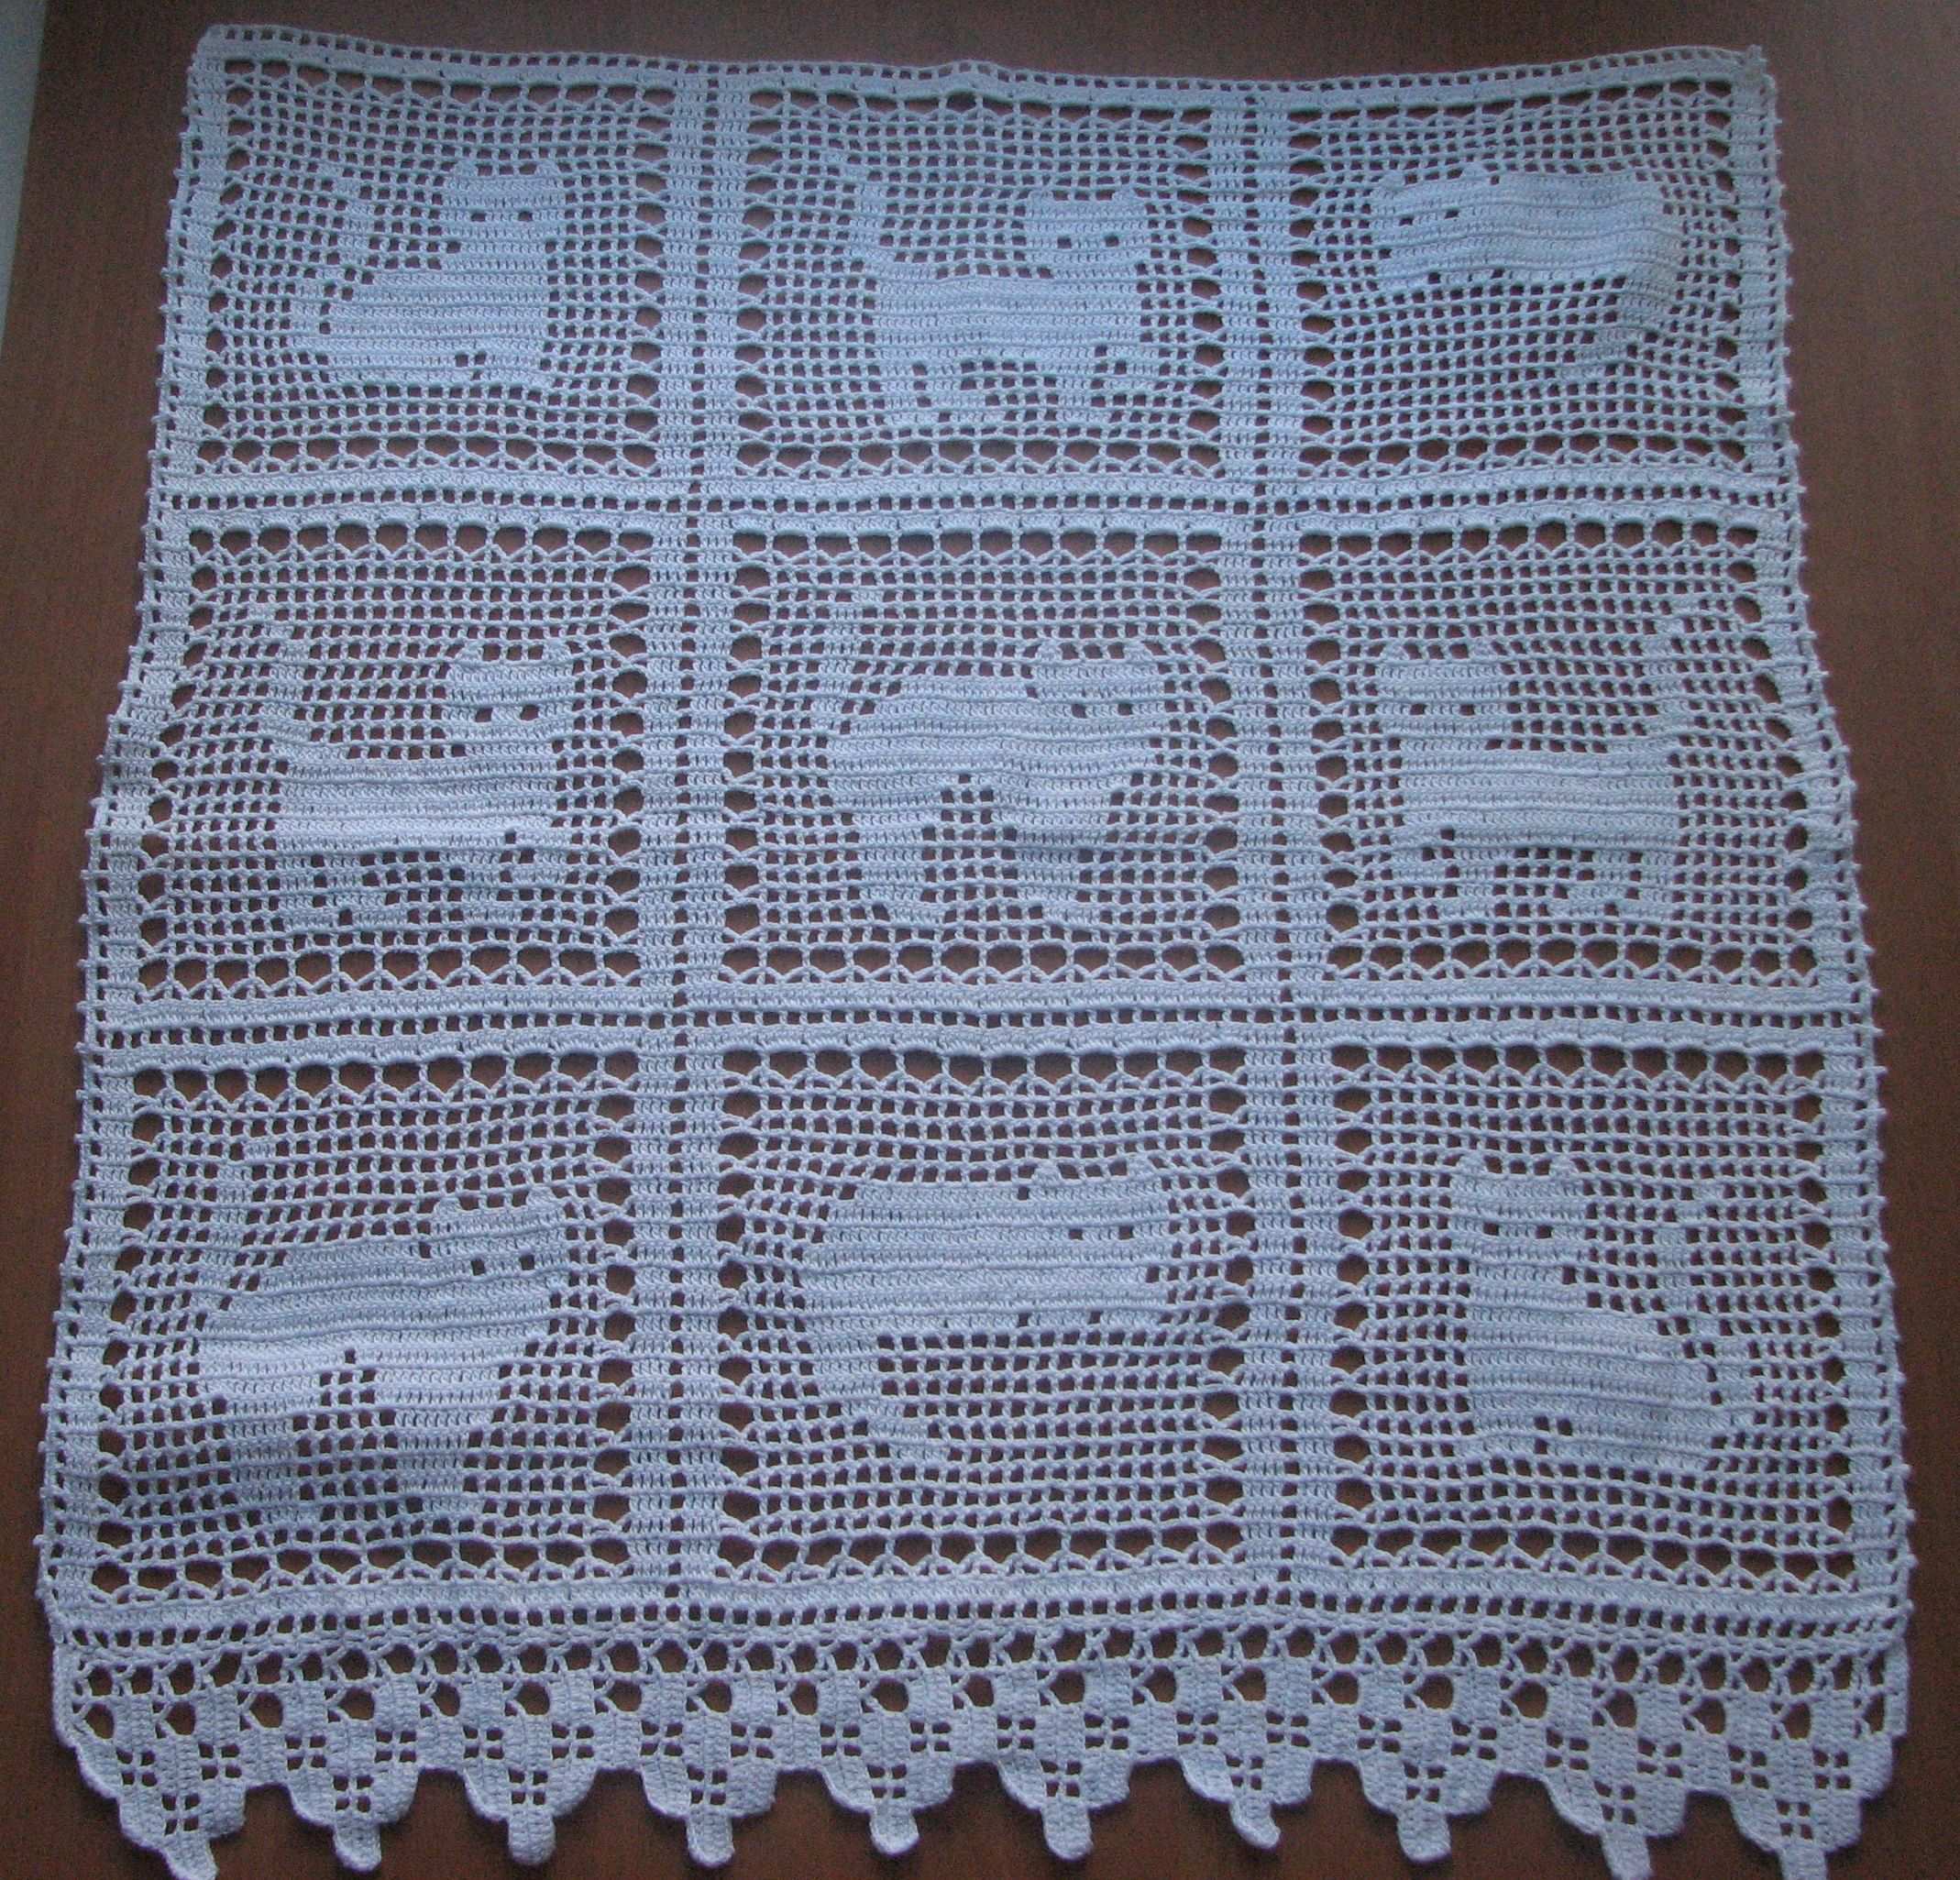 Crochet Curtains Hand Made Cotton Curtain Celestial Cat Curtains Lace Crochet Curtain Panel Lace Handm Crochet Curtains Filet Crochet Fillet Crochet Charts